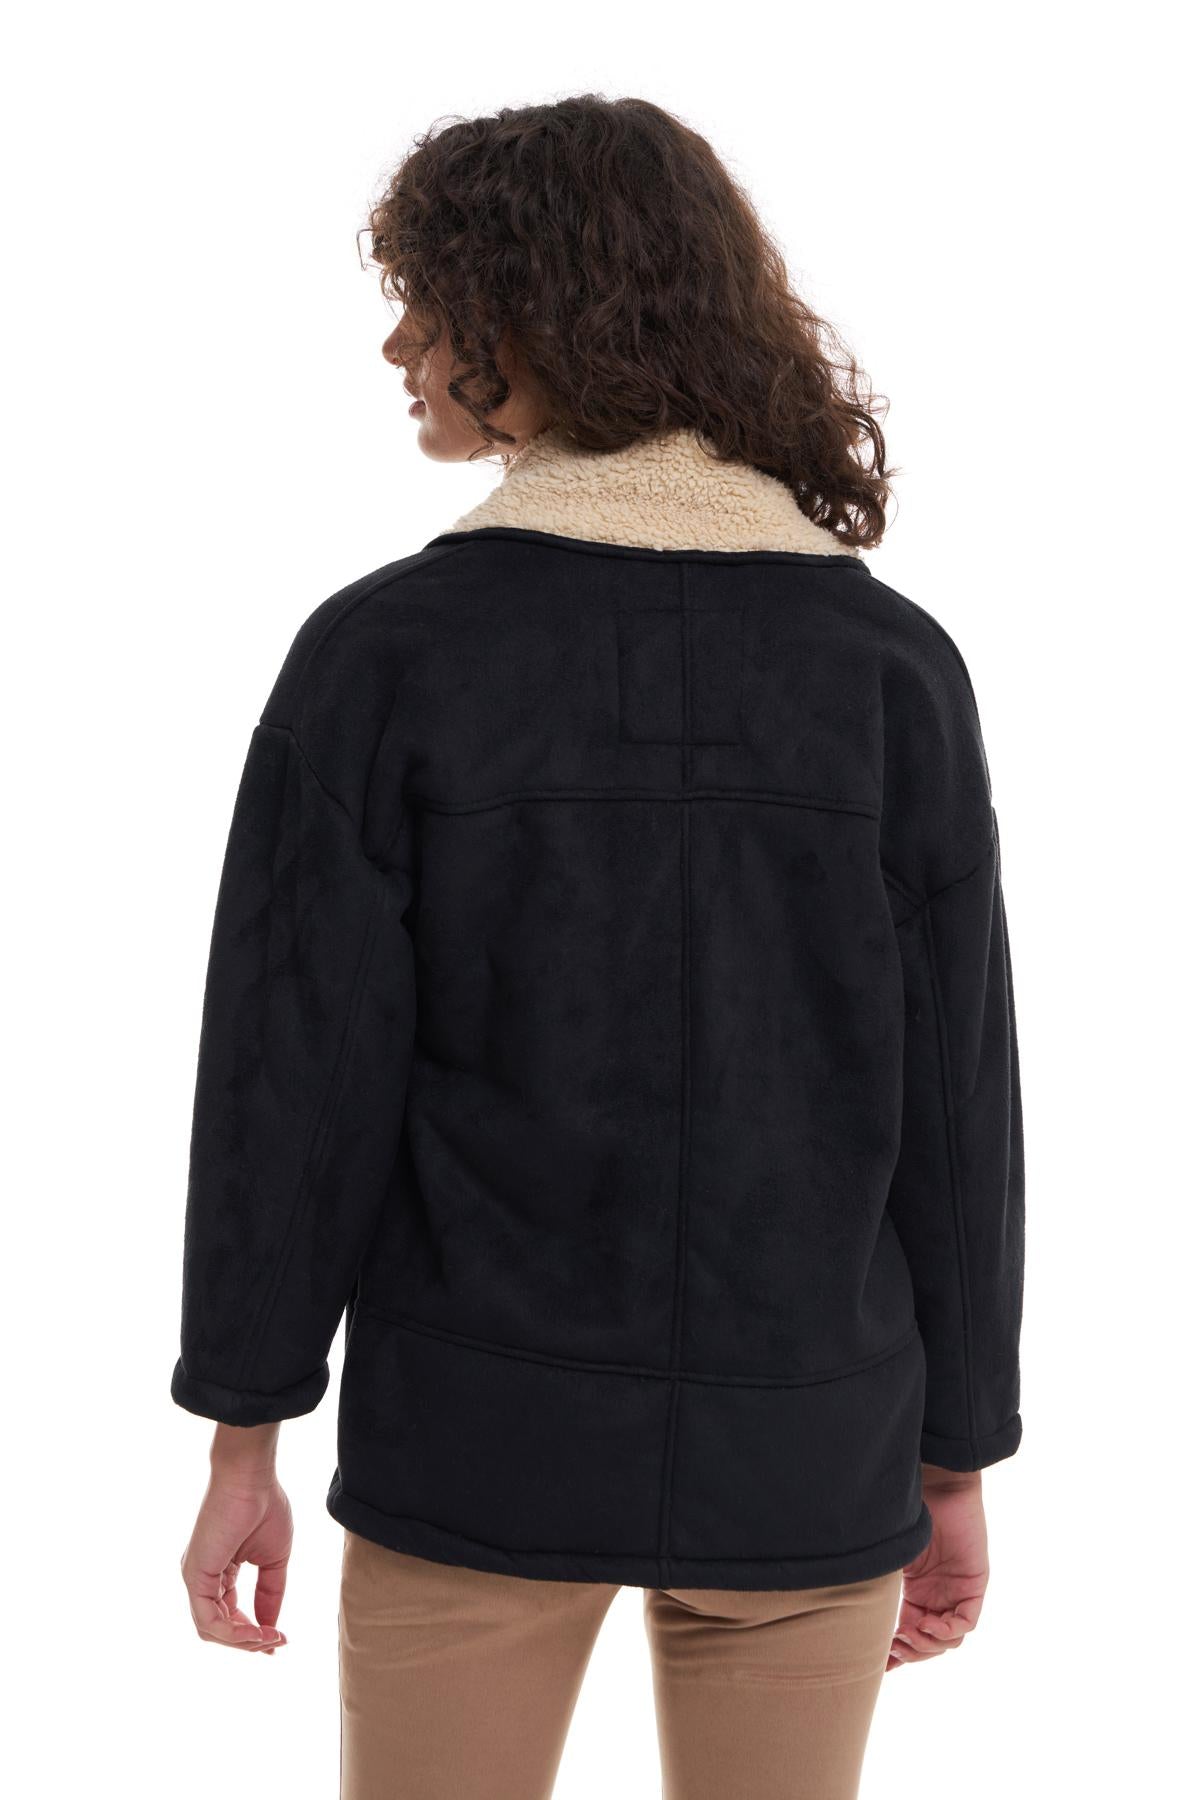 Double Breasted Suede Coat Black